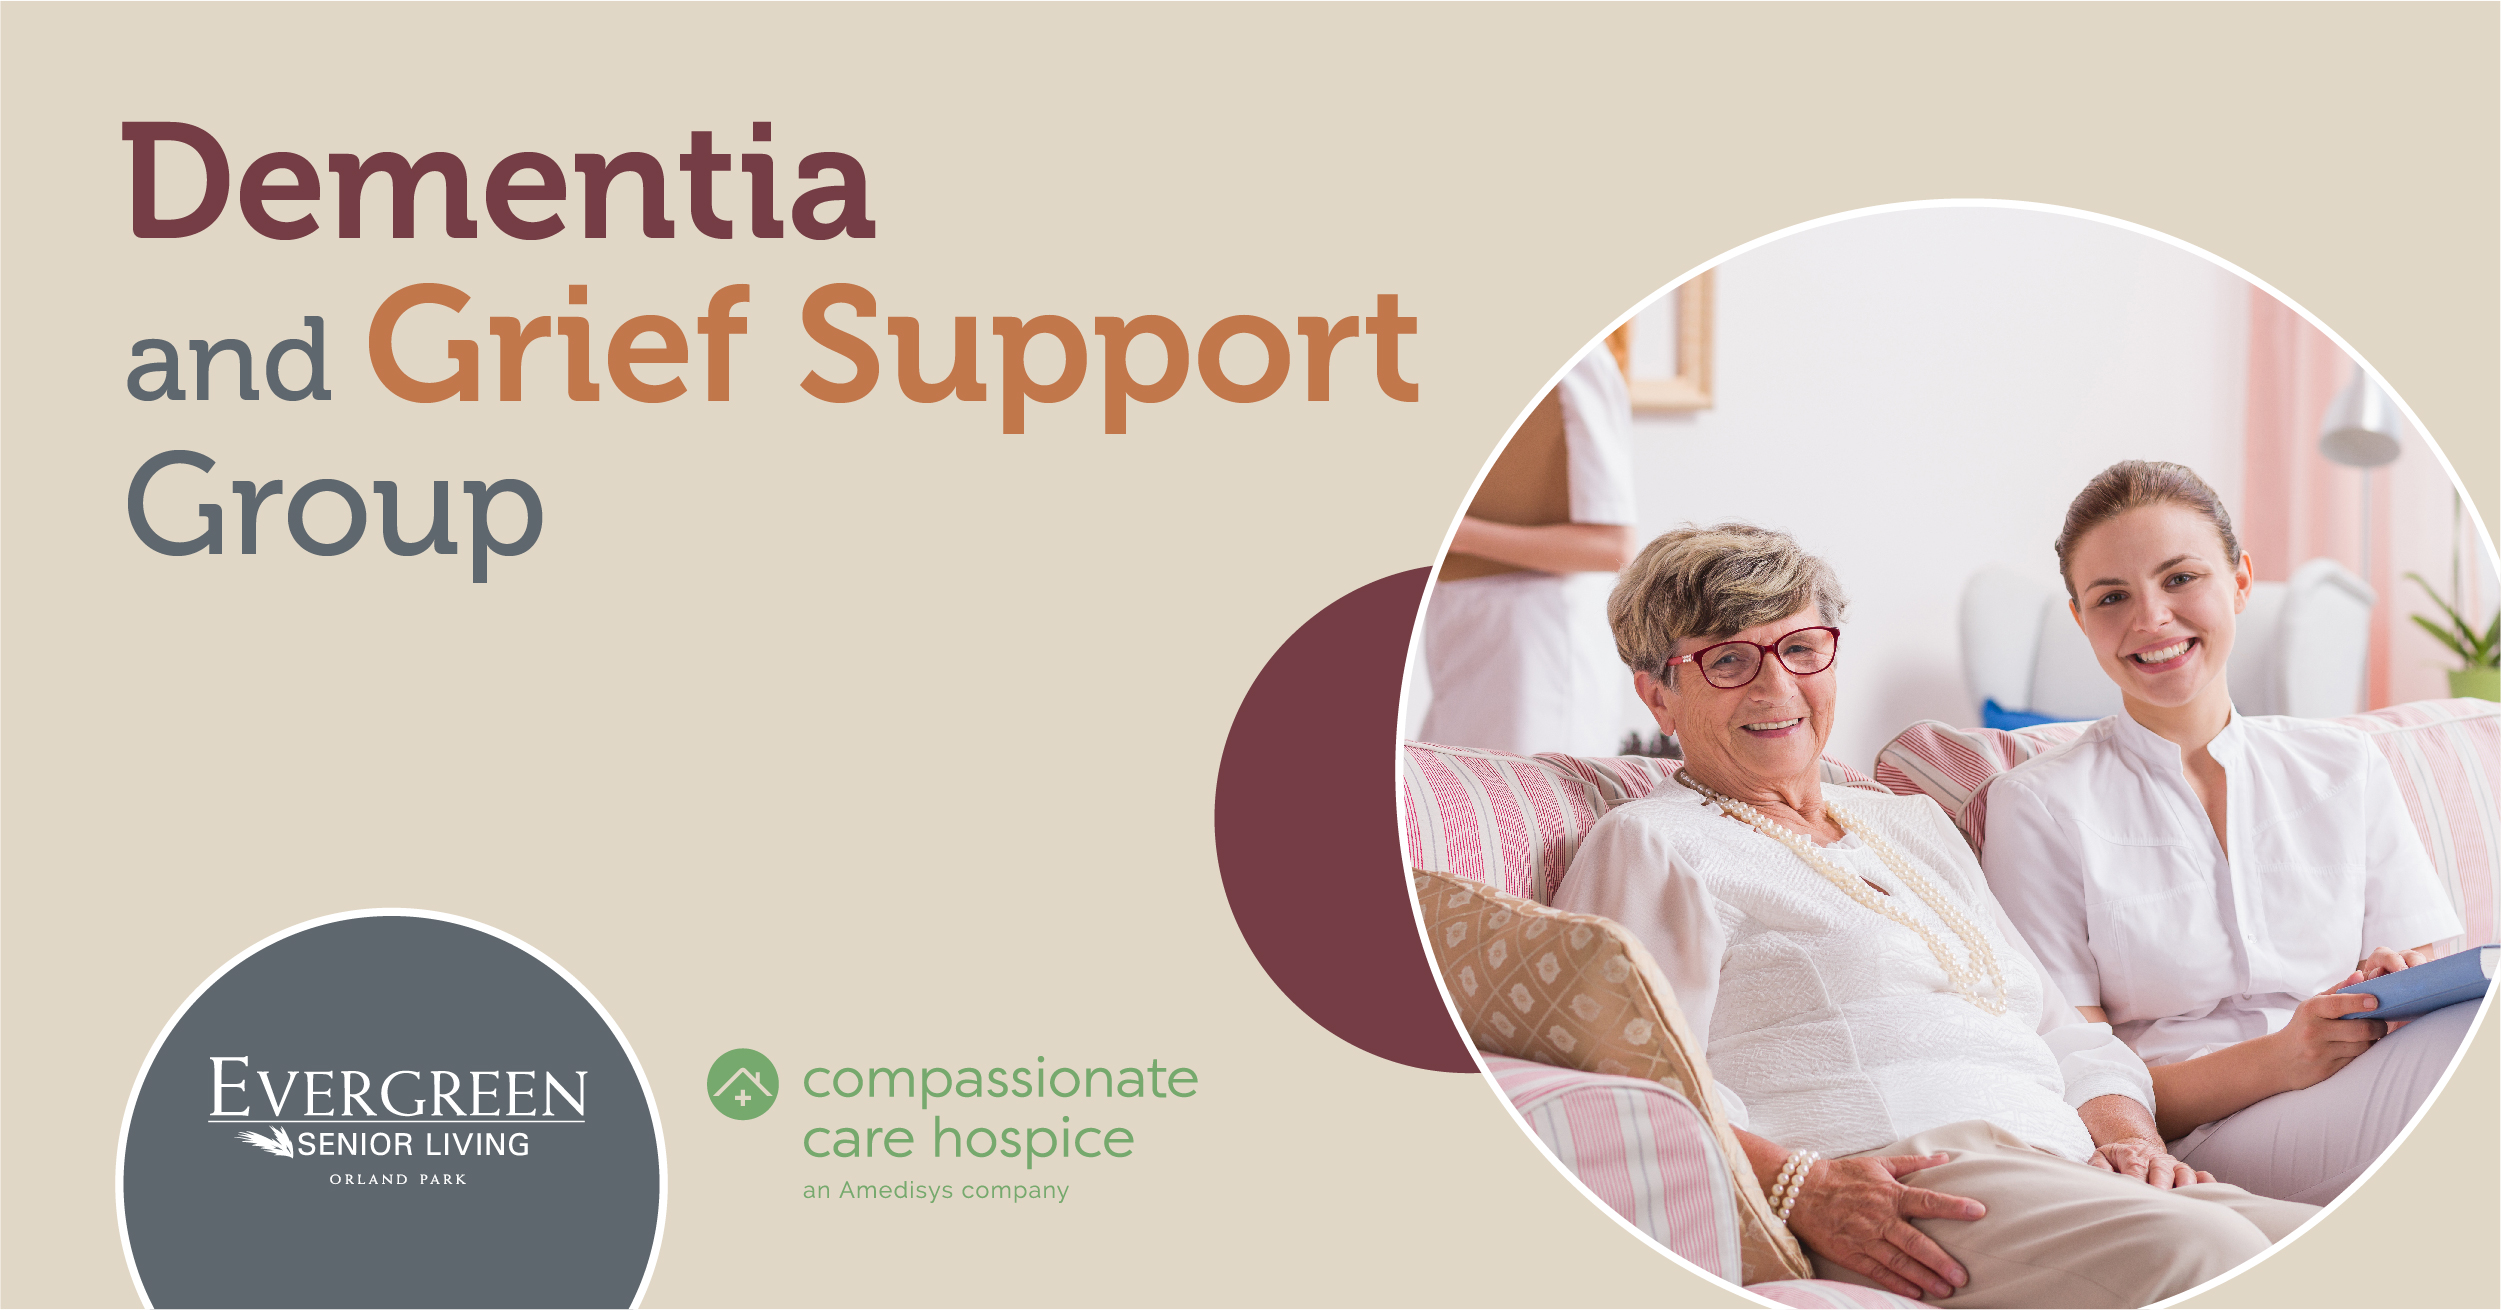 Dementia and Grief Support Group